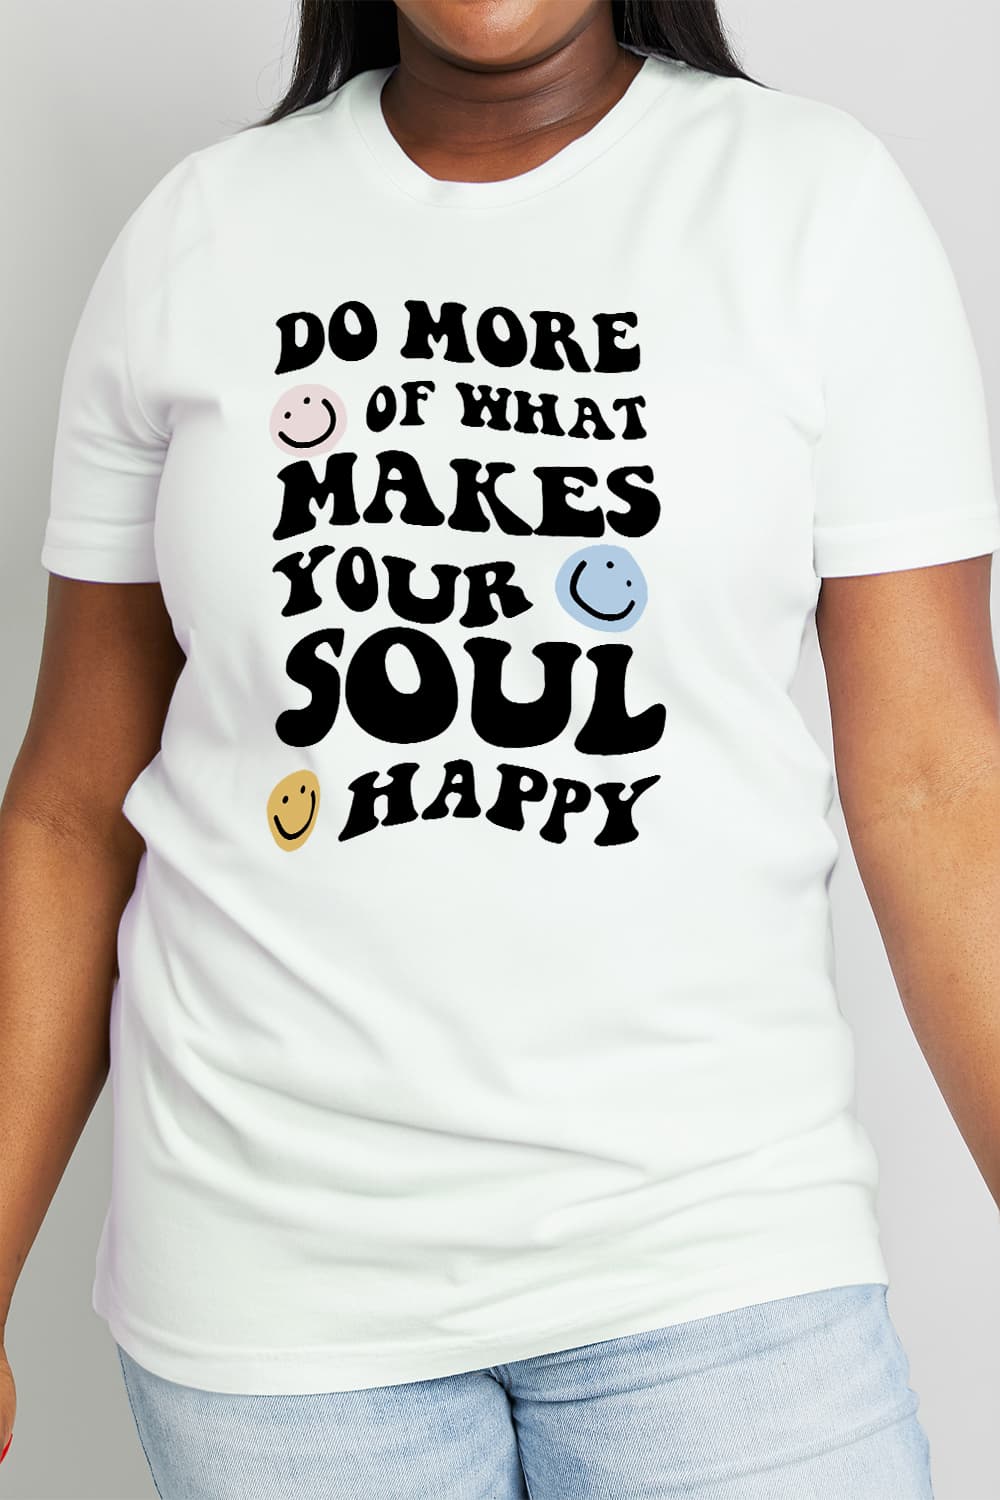 Soul Happy Cotton Tee by Simply Love